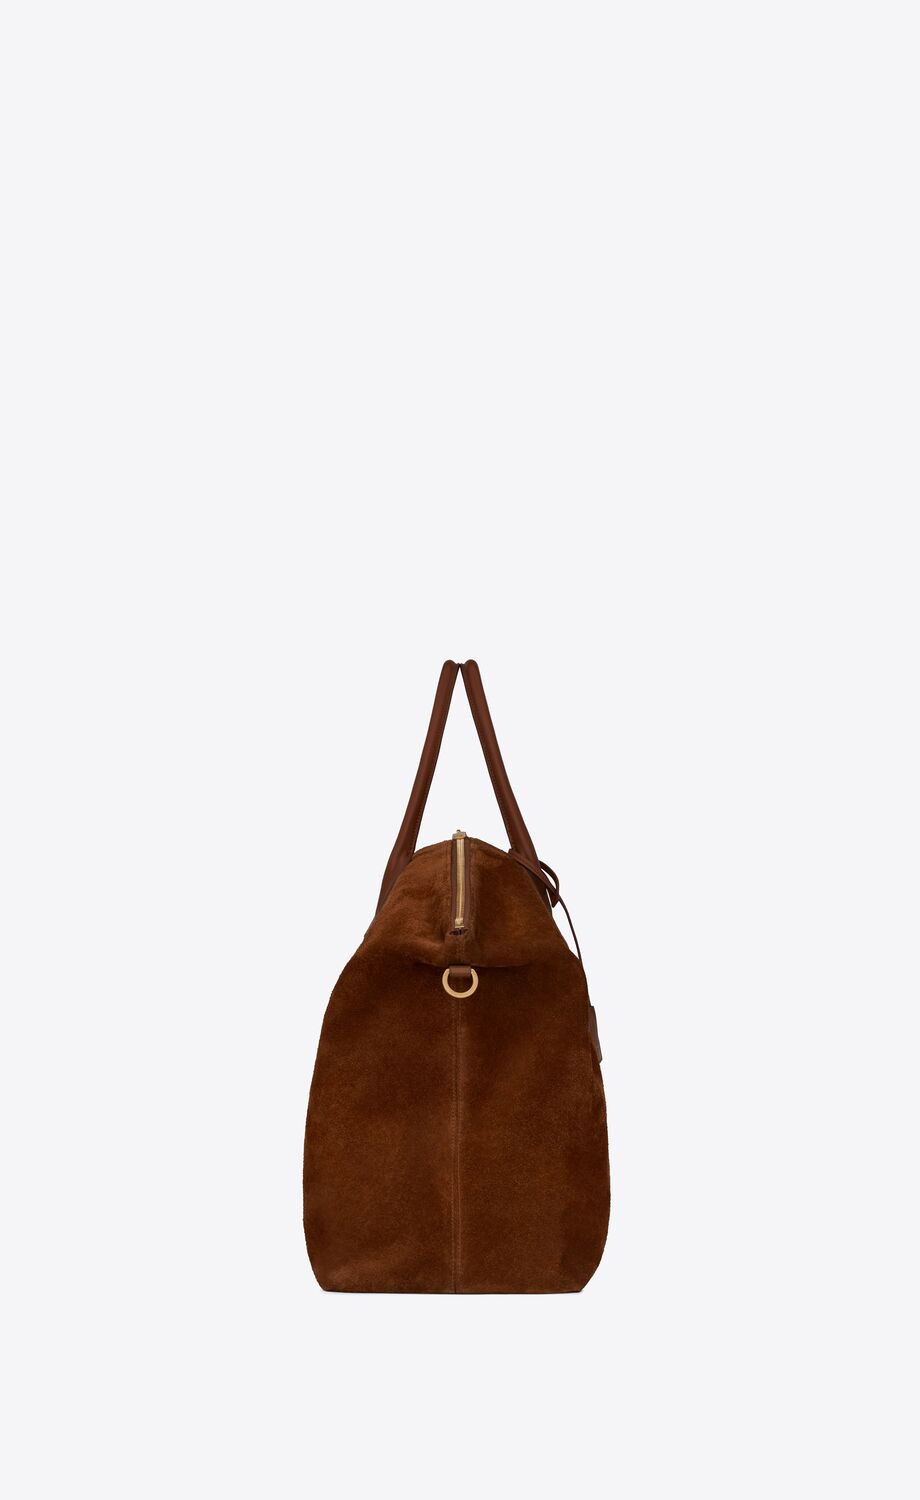 GIANT BOWLING bag in suede | Saint Laurent | YSL.com